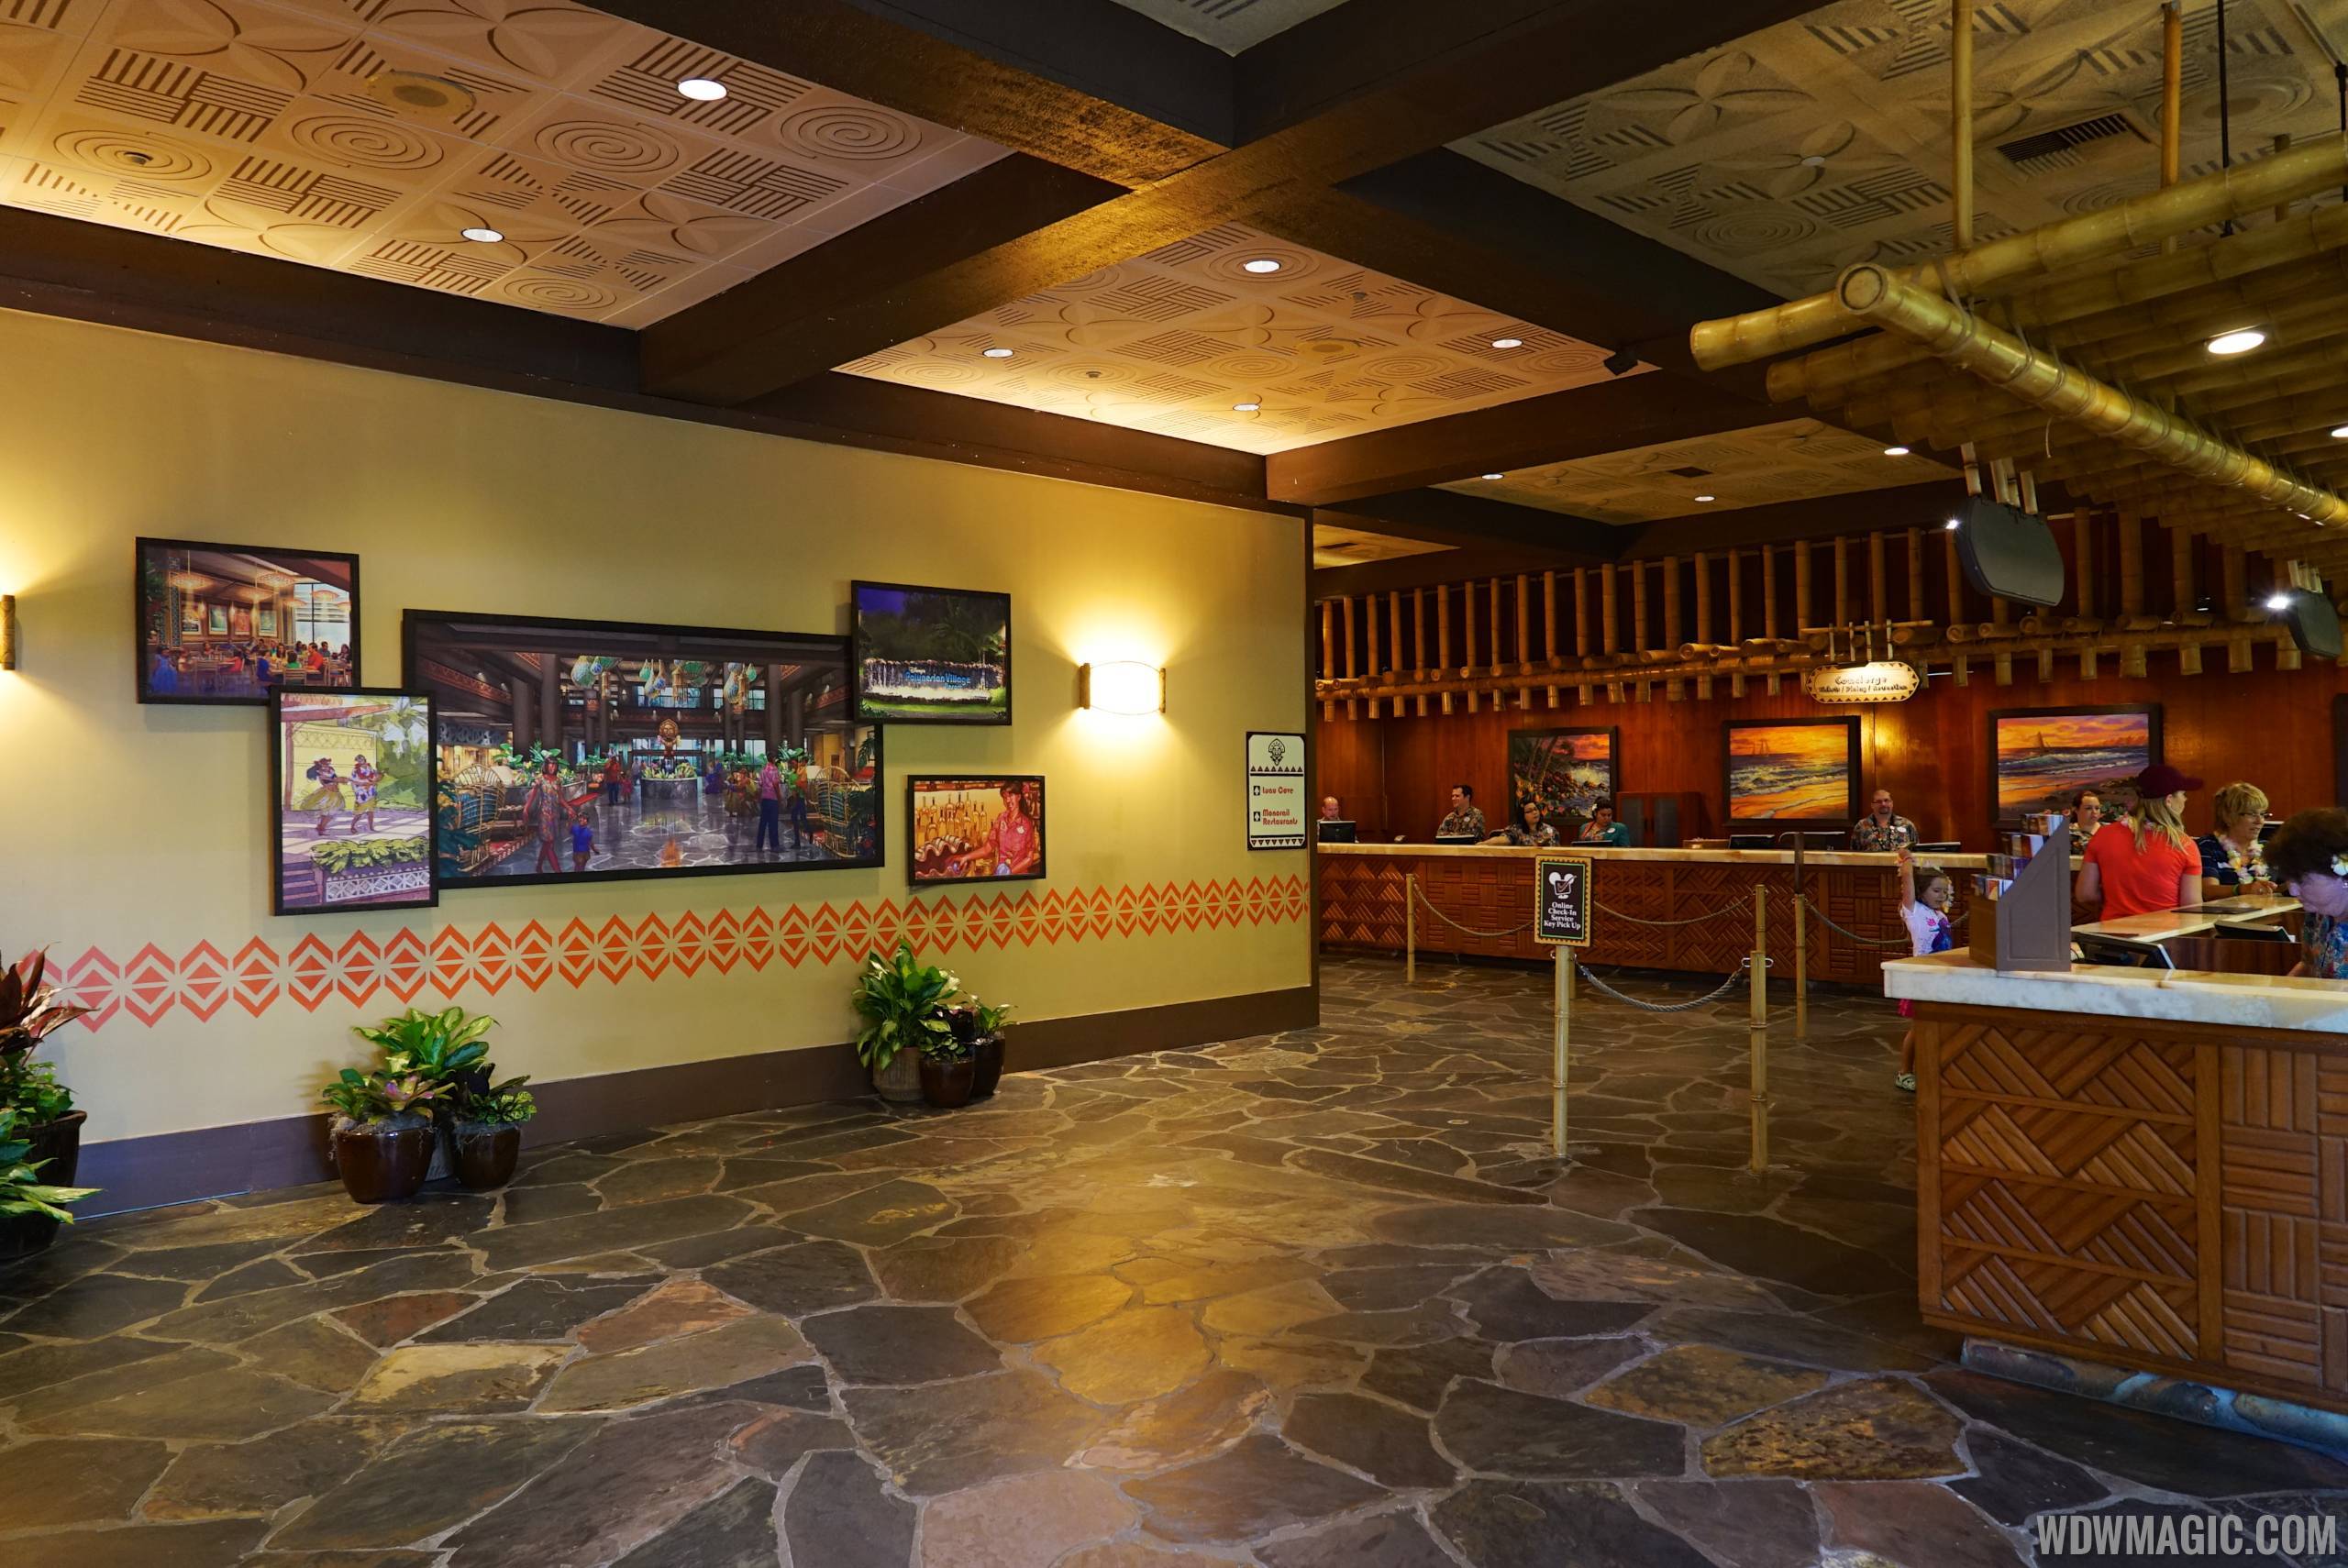 PHOTOS - A look inside the Polynesian Resort Great Ceremonial House